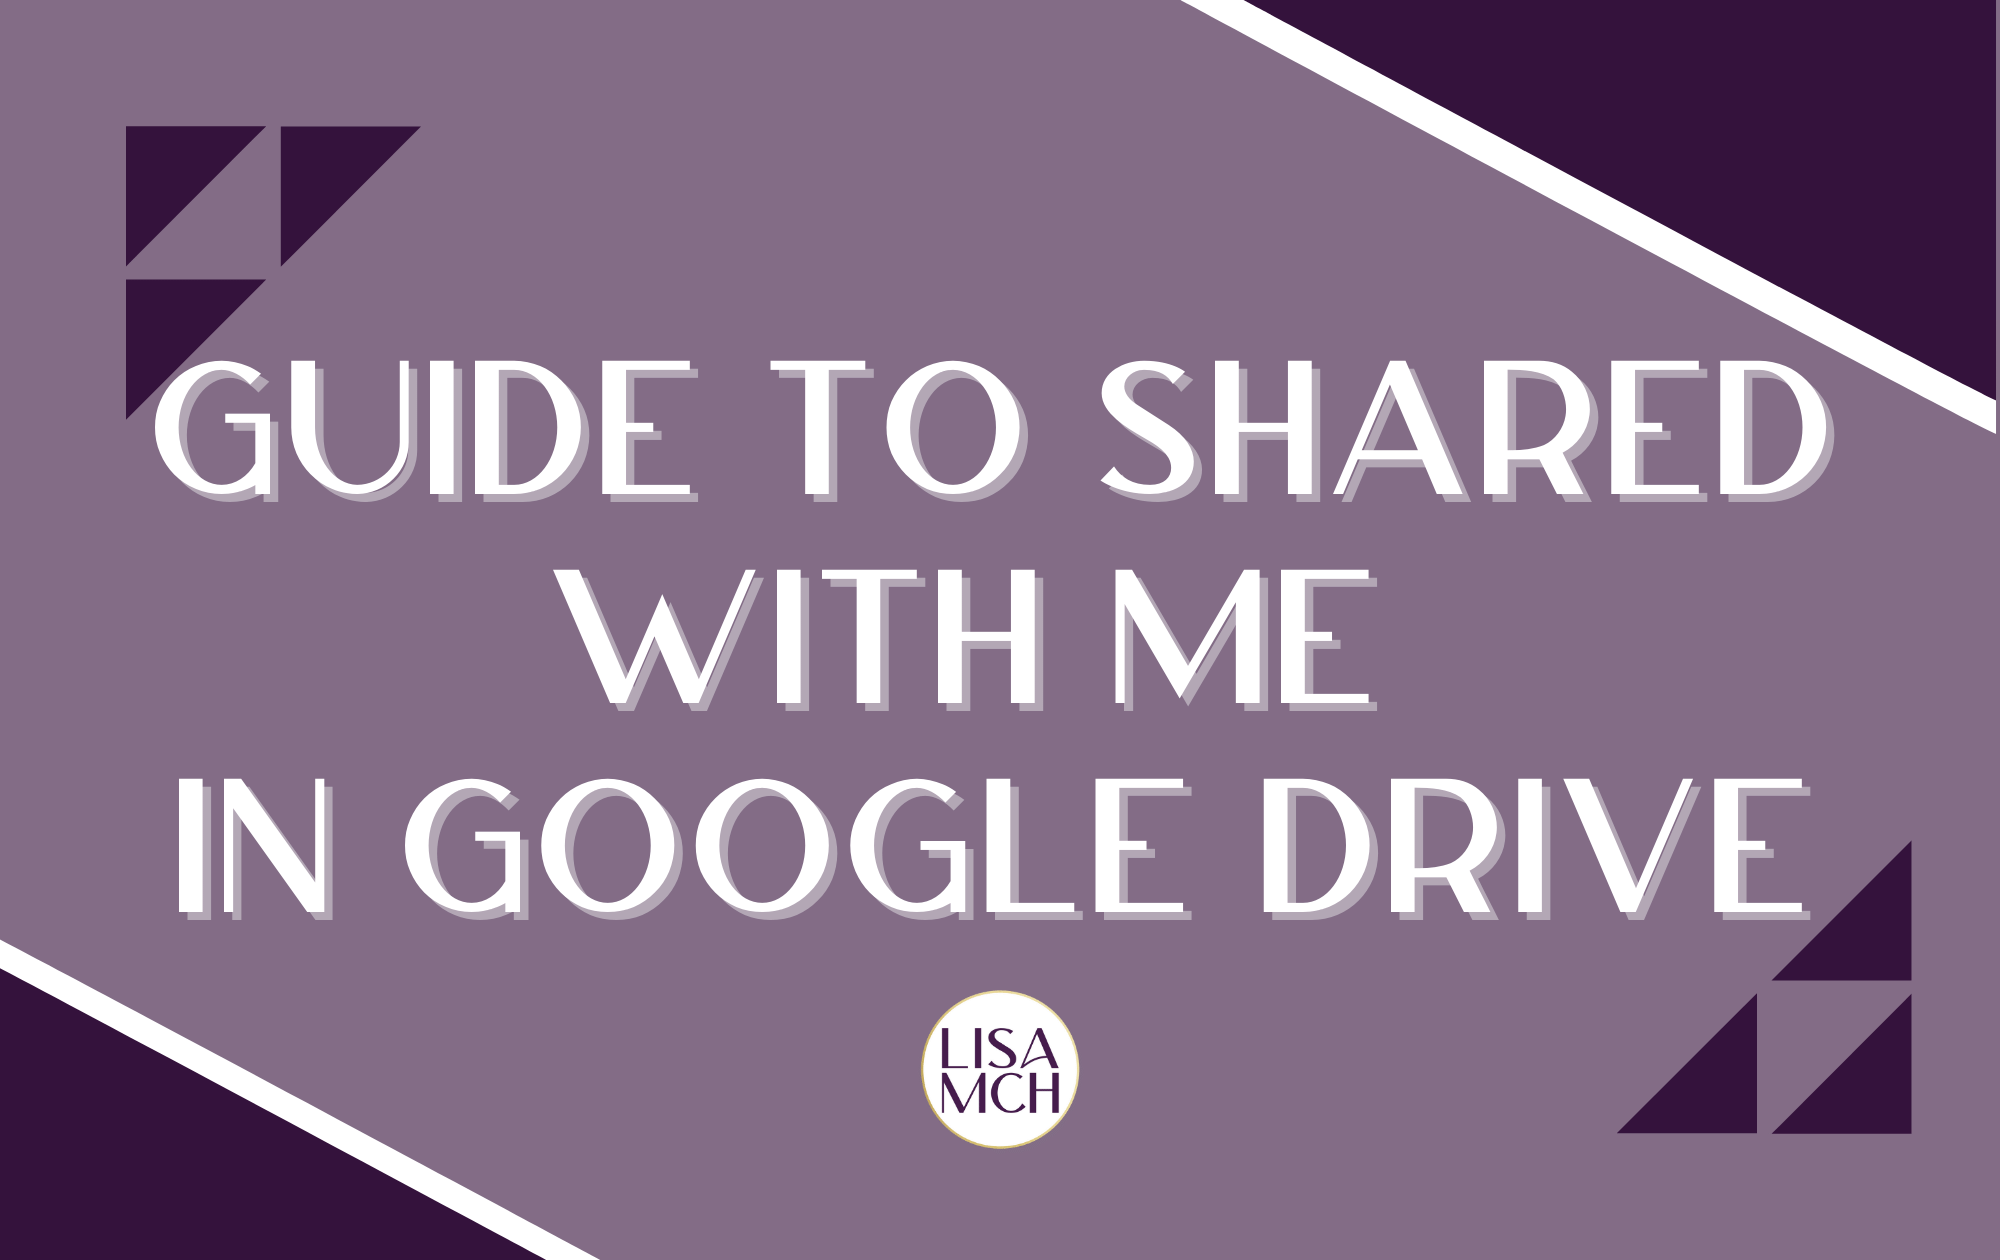 Guide to Shared With Me in Google Drive is written on purple background